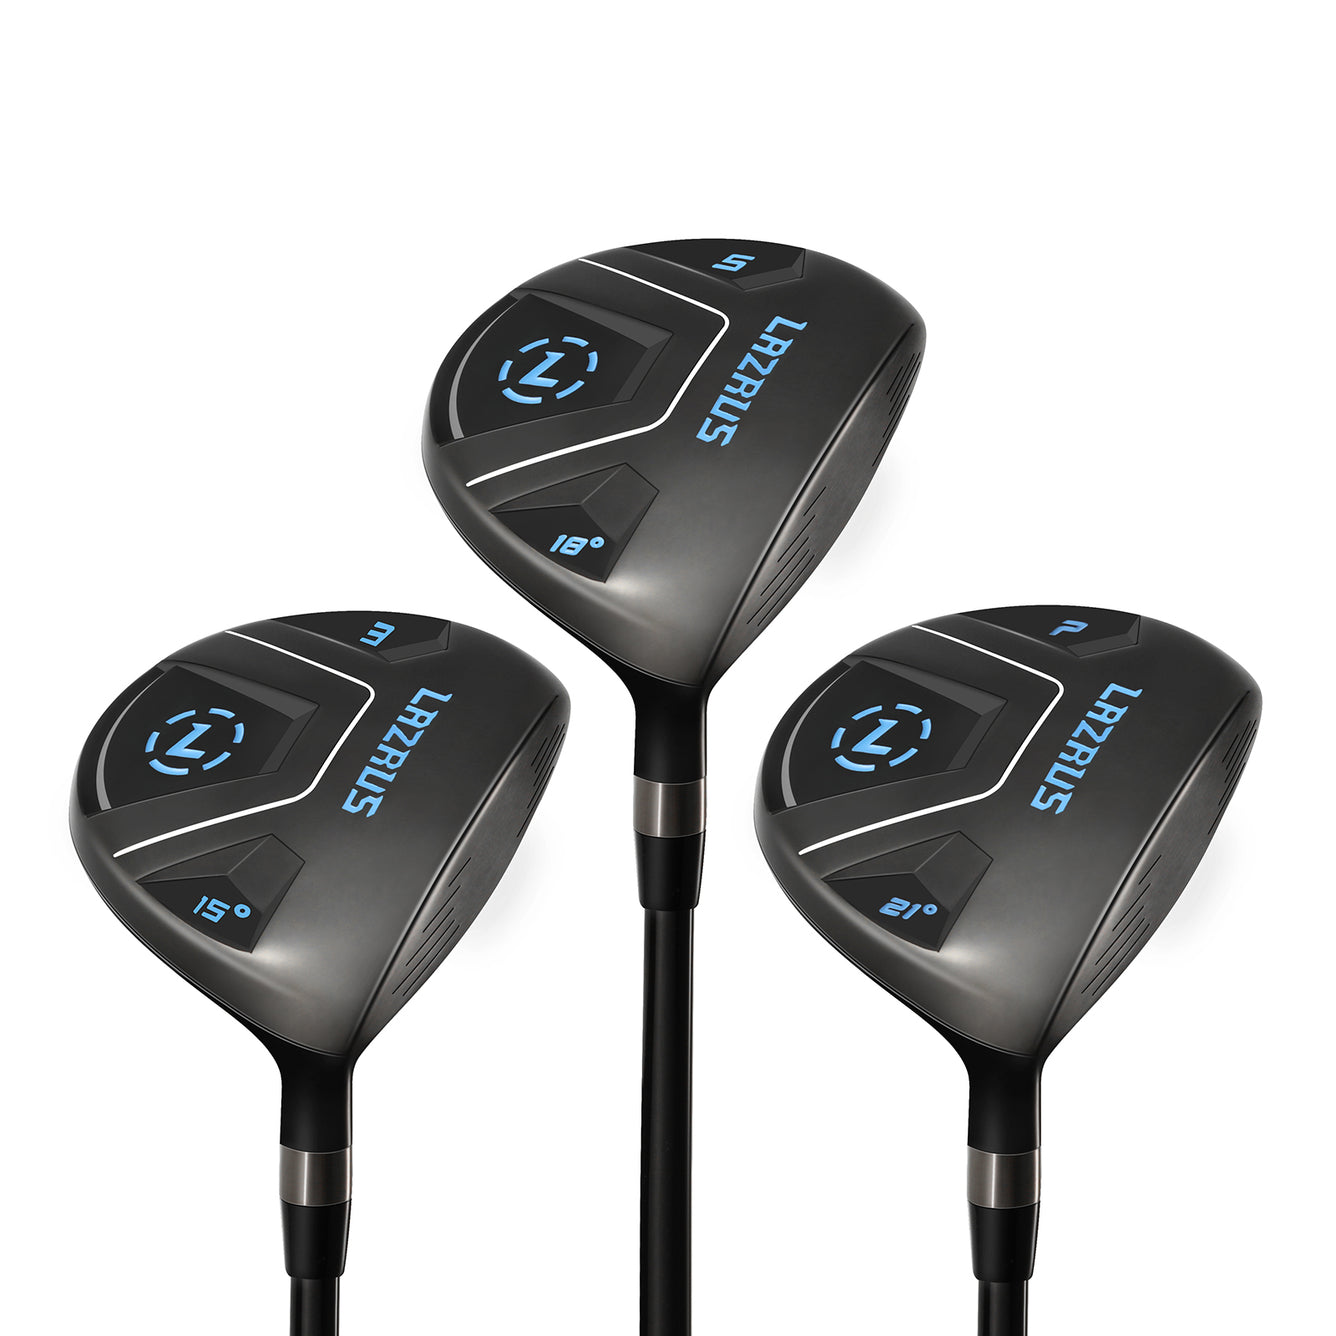 Lazrus Golf Fairway Woods (3,5,7) Individual Or Set (Right & Left Hand) & Free Head Covers